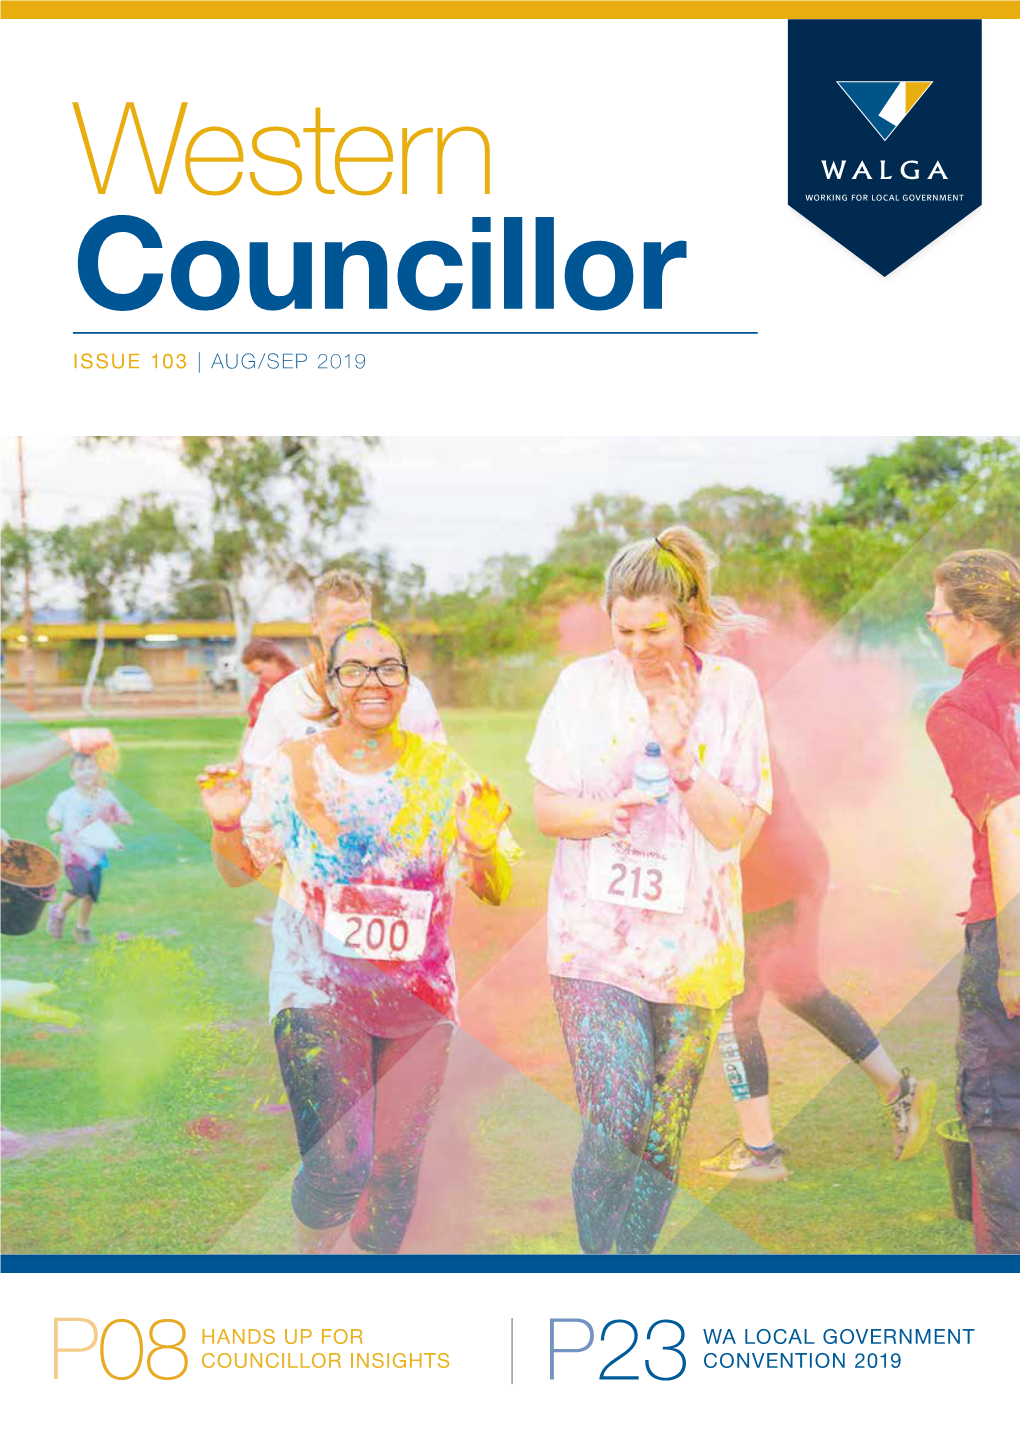 Western Councillor ISSUE 103 | AUG/SEP 2019